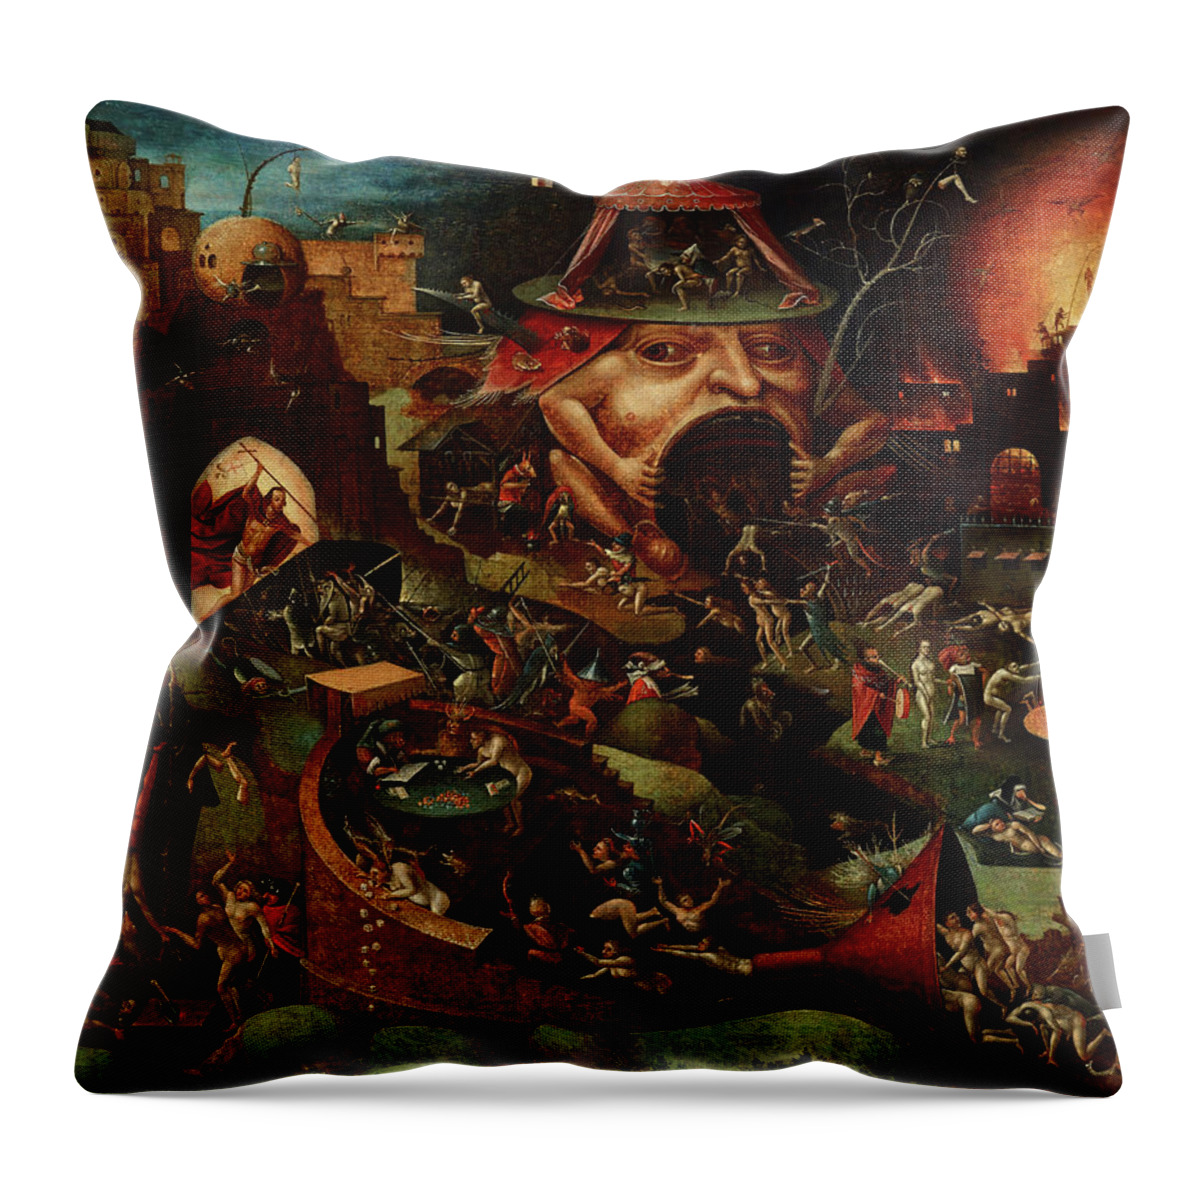 Hieronymus Bosch Throw Pillow featuring the painting Christ In Limbo, 1575 by Hieronymus Bosch